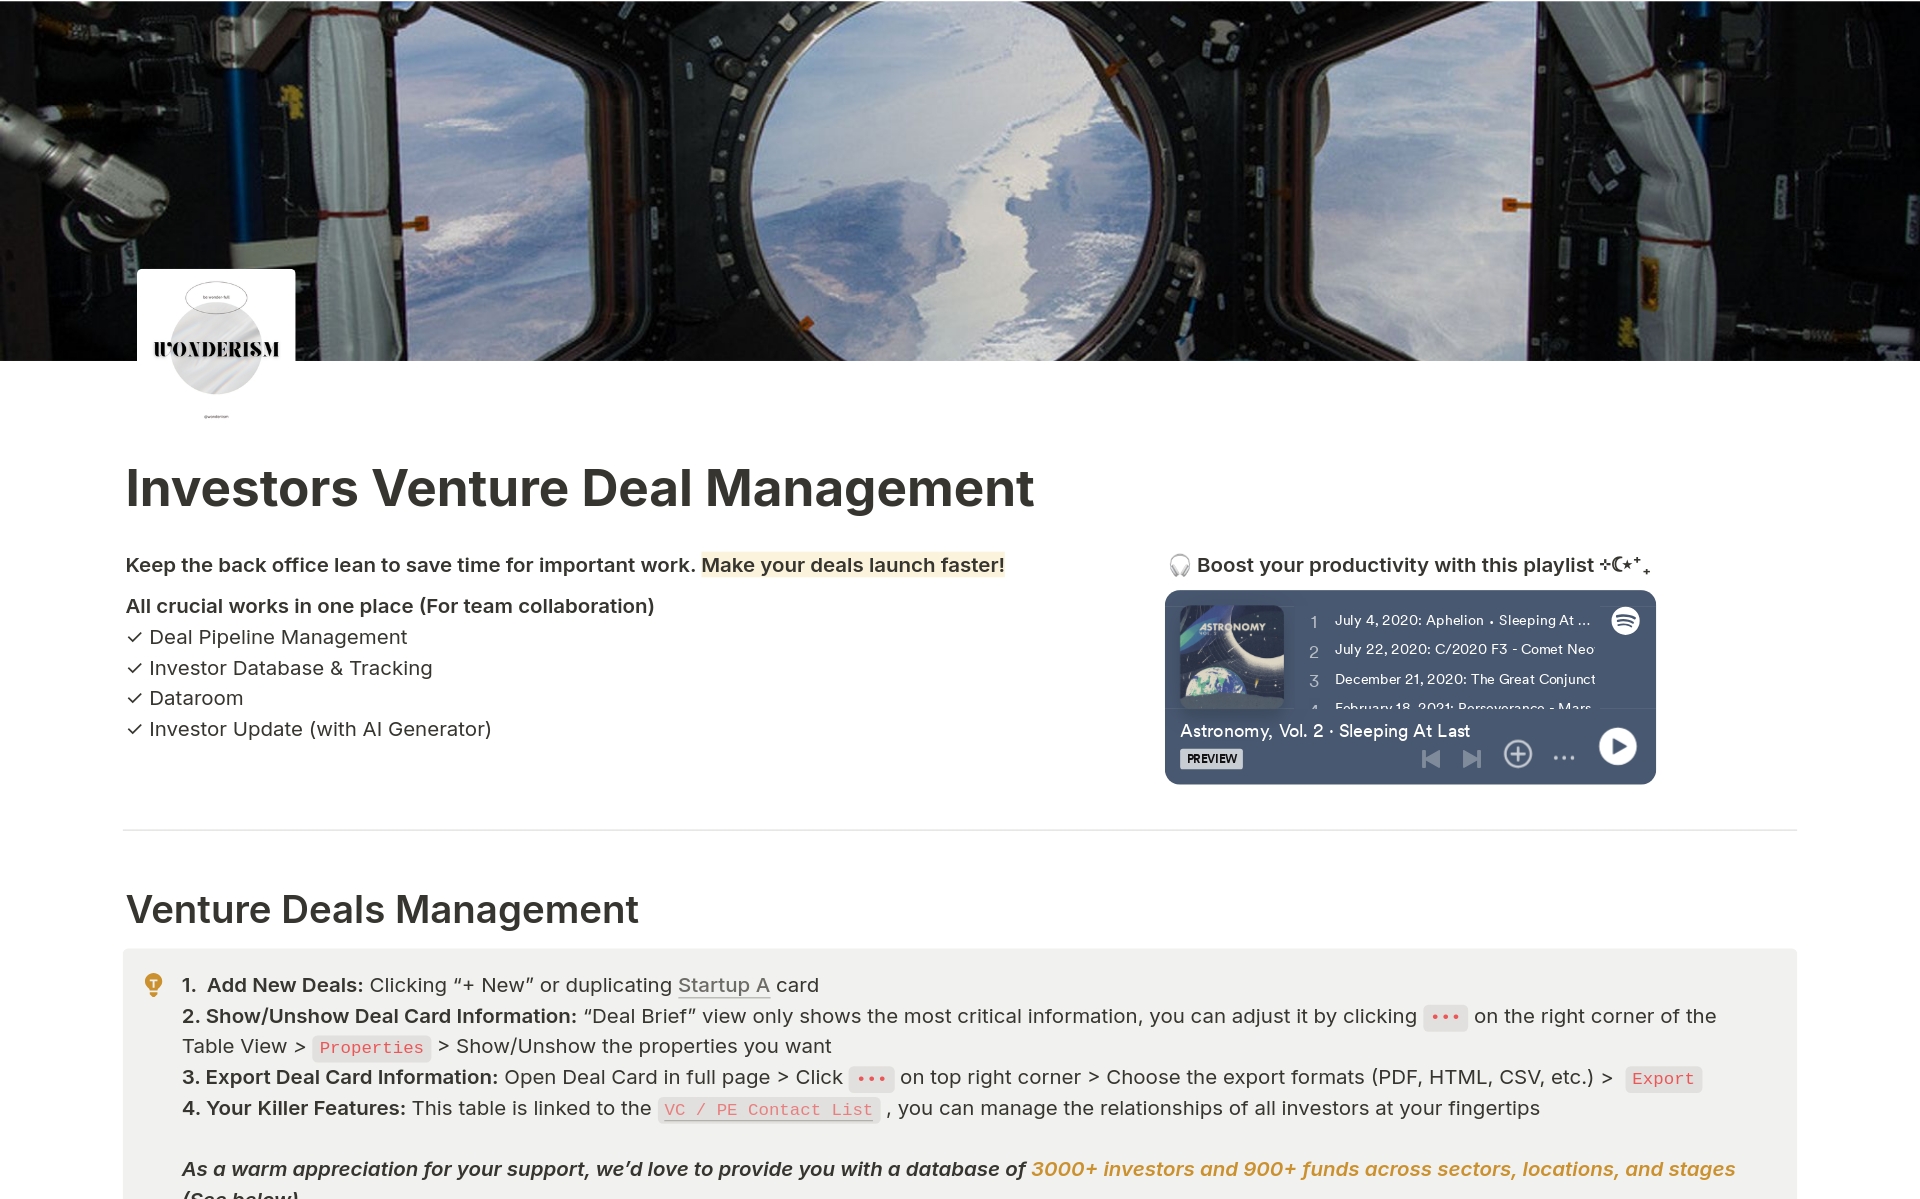 A resourceful ALL-IN-ONE template designed to help the investment team save time on deal management efforts, which included all the crucial features for a small fund.